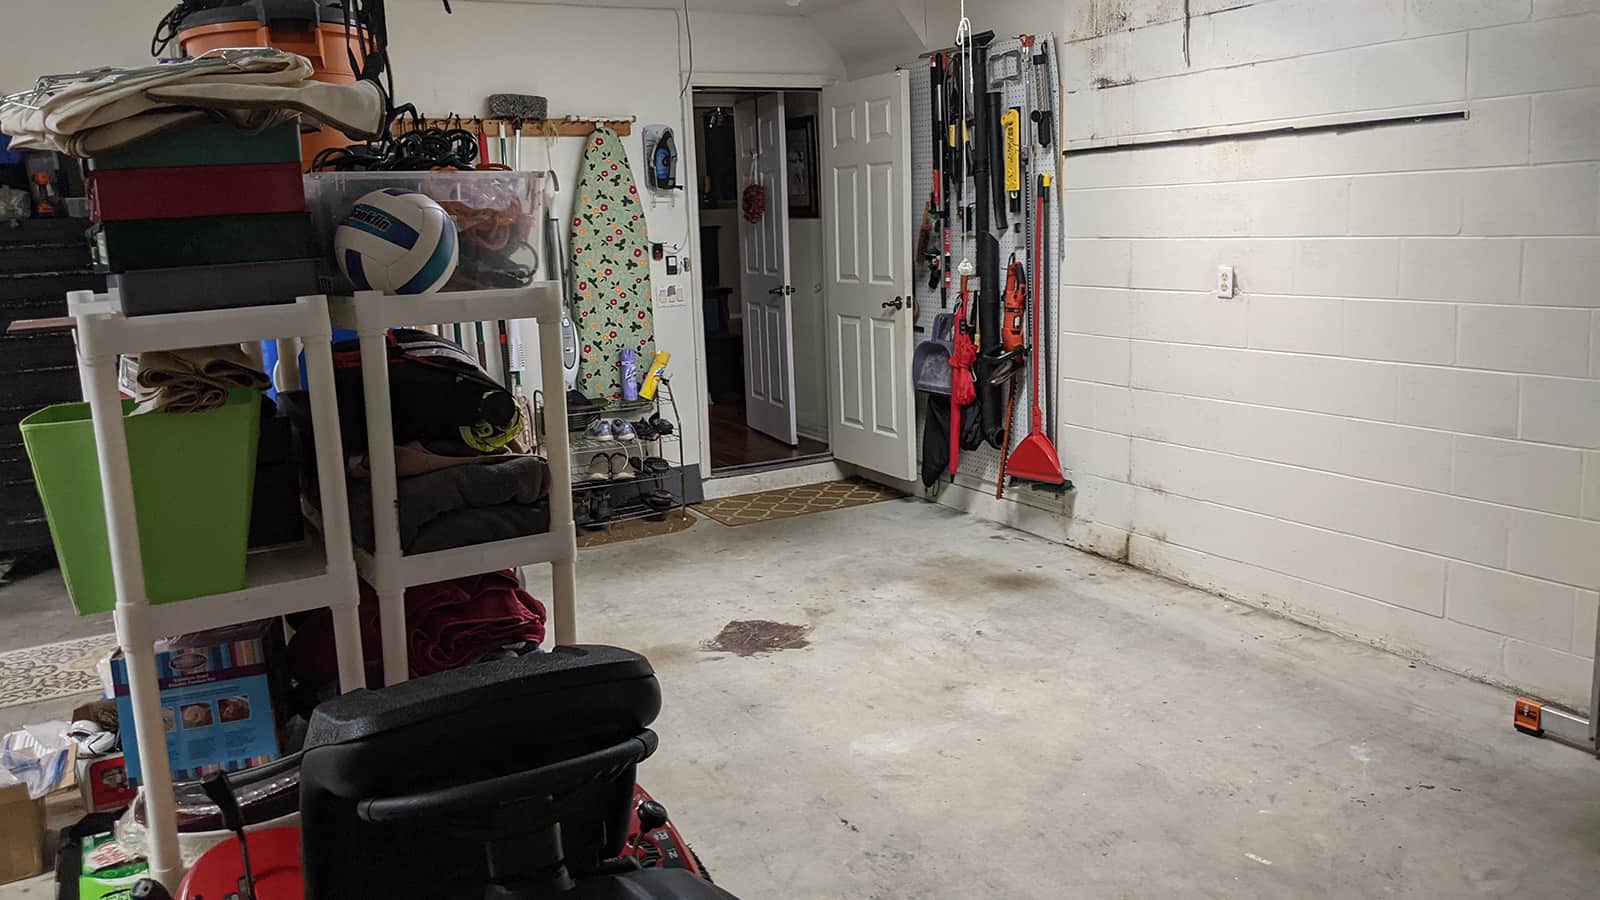 xtampa-garage-remodel-before-232034295.jpg.pagespeed.ic.soA7Iyxzsq